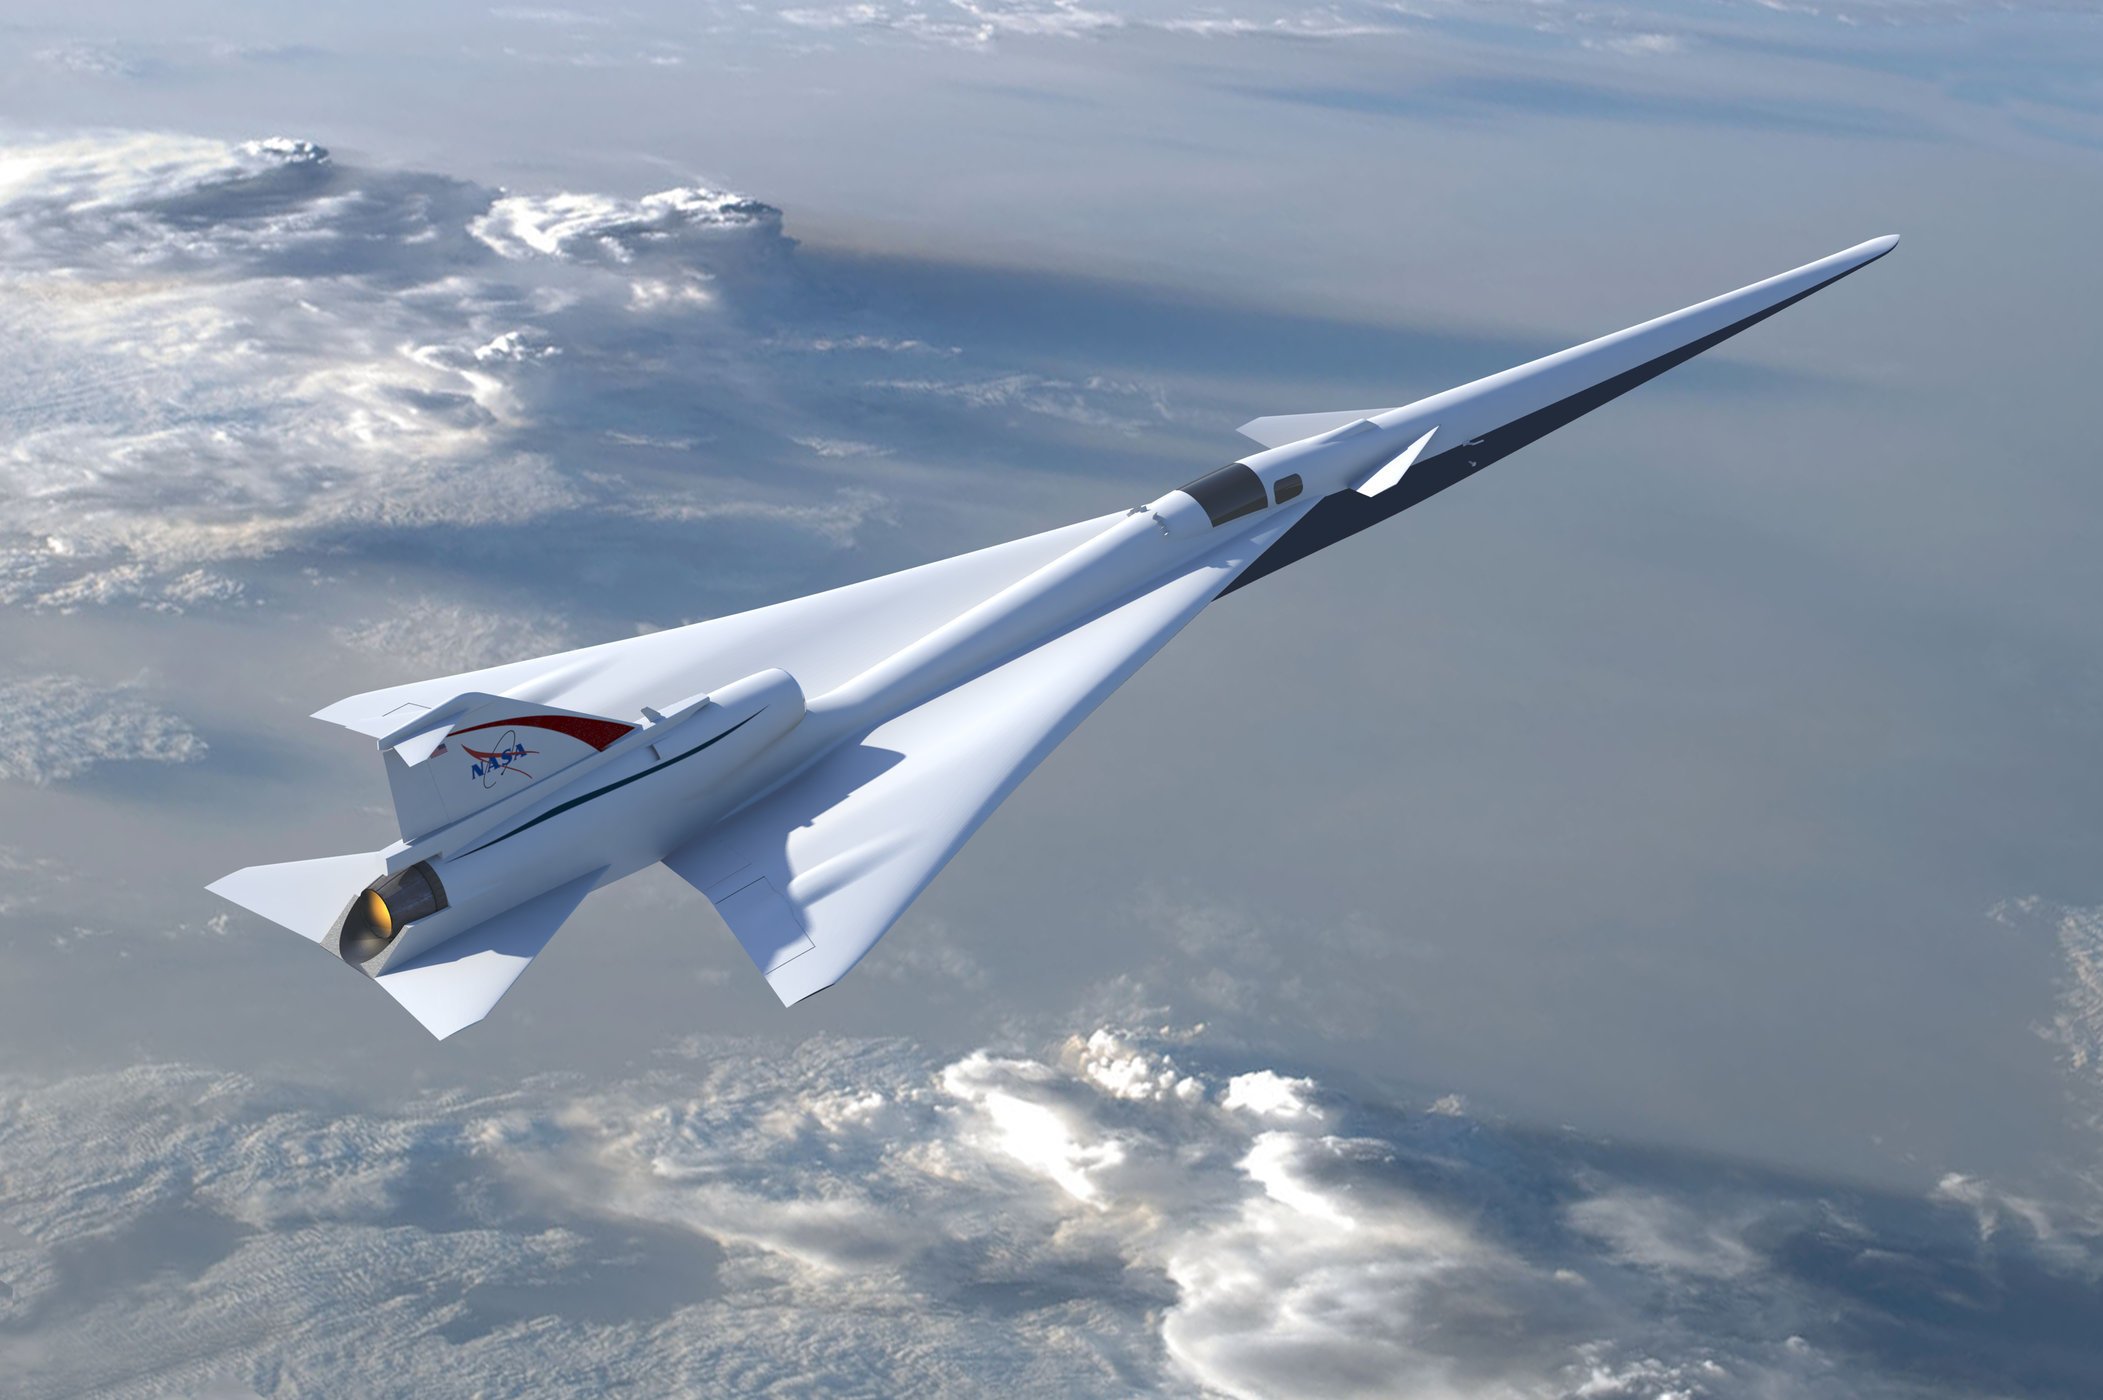 NASA awards Lockheed Martin $250 million contract for the development of a quiet supersonic aircraft